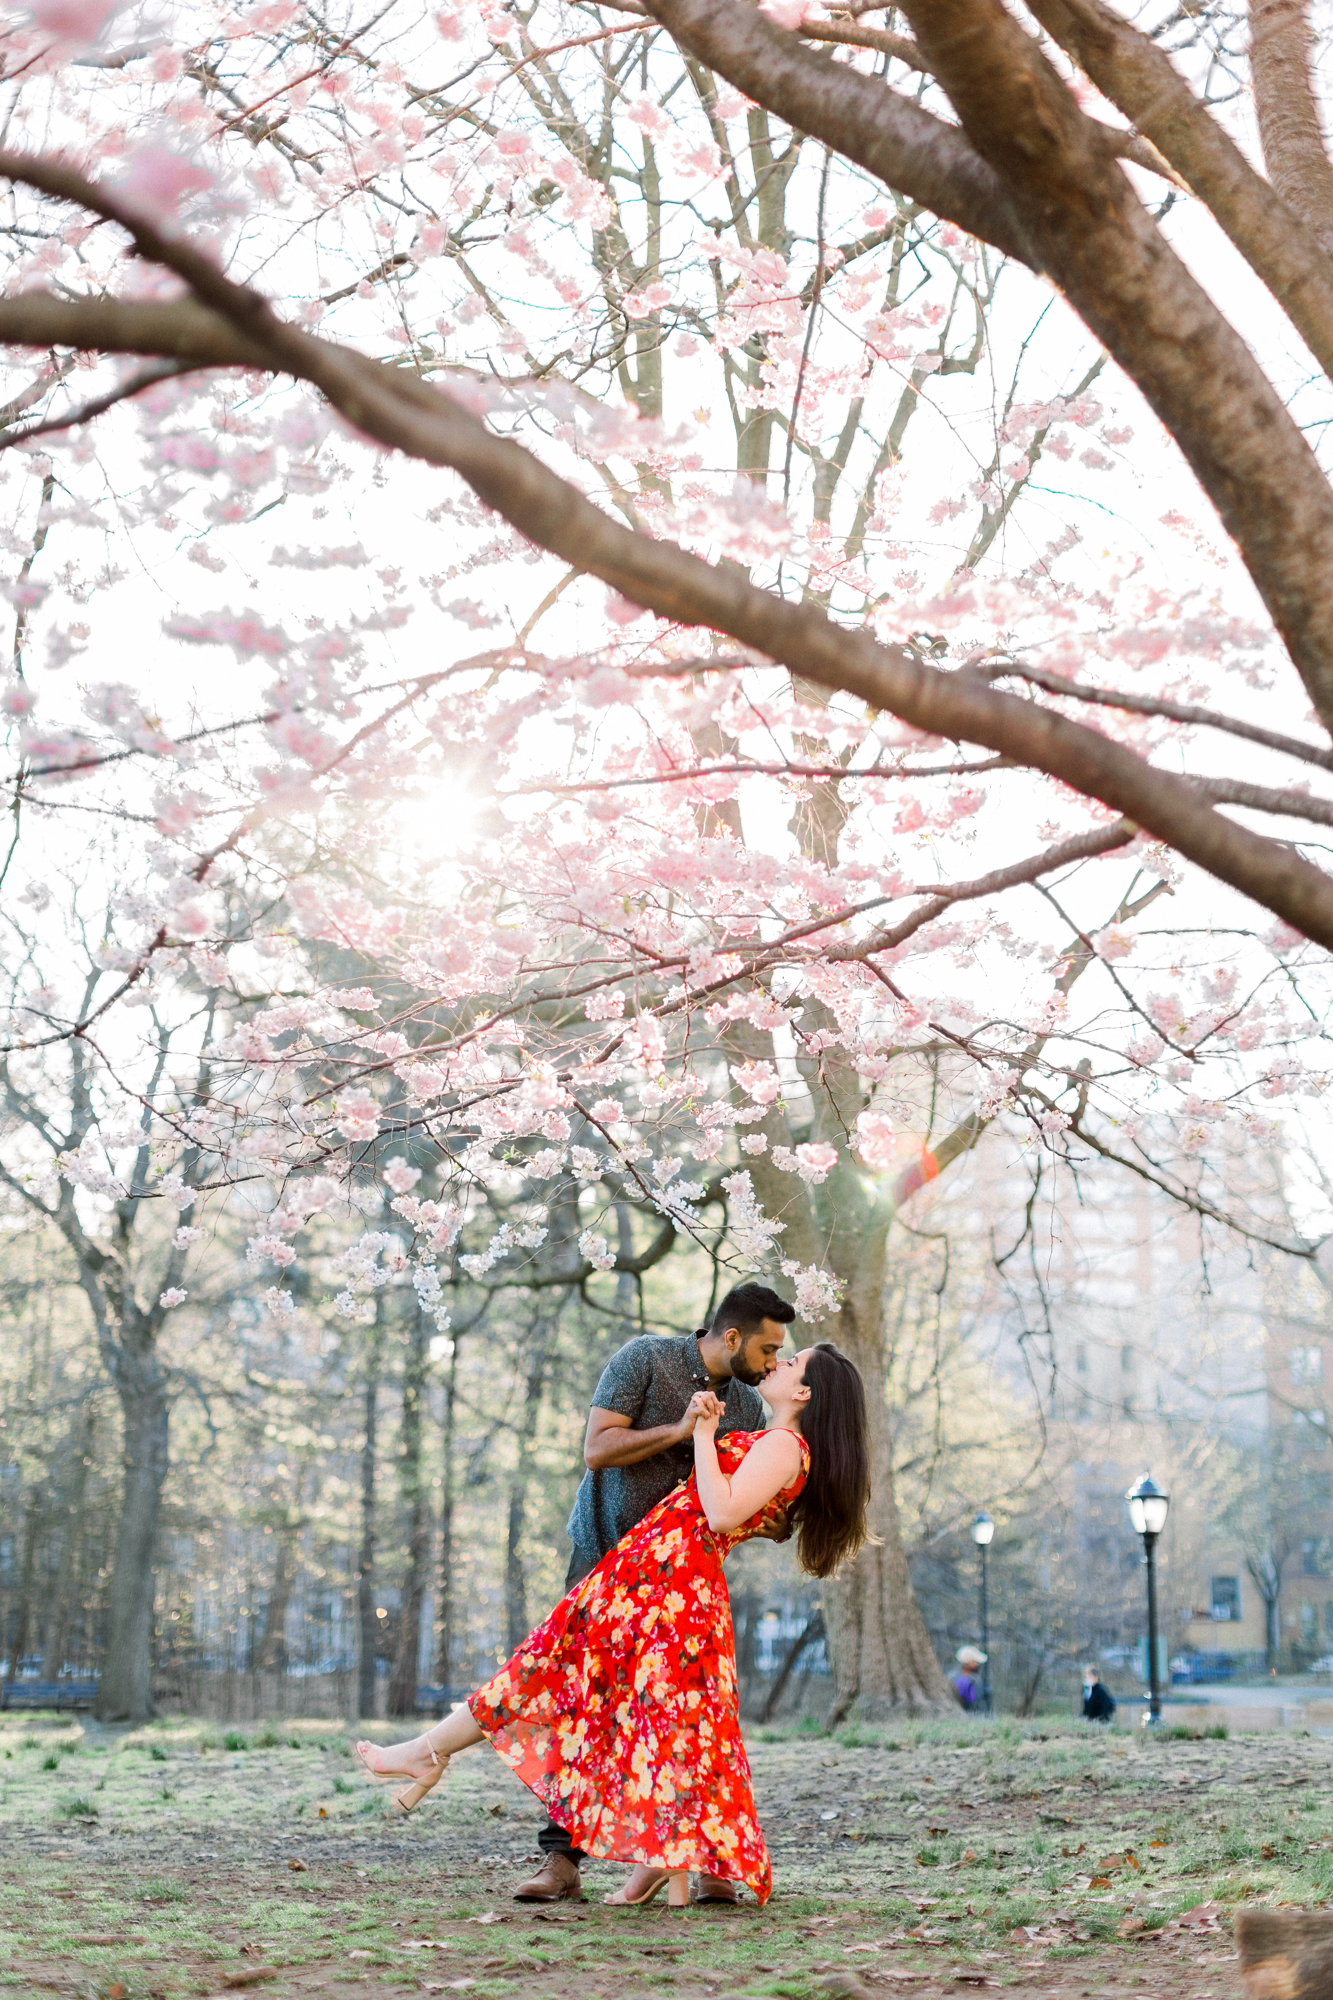 Picturesque NYC Engagement Photography with Spring Blossoms